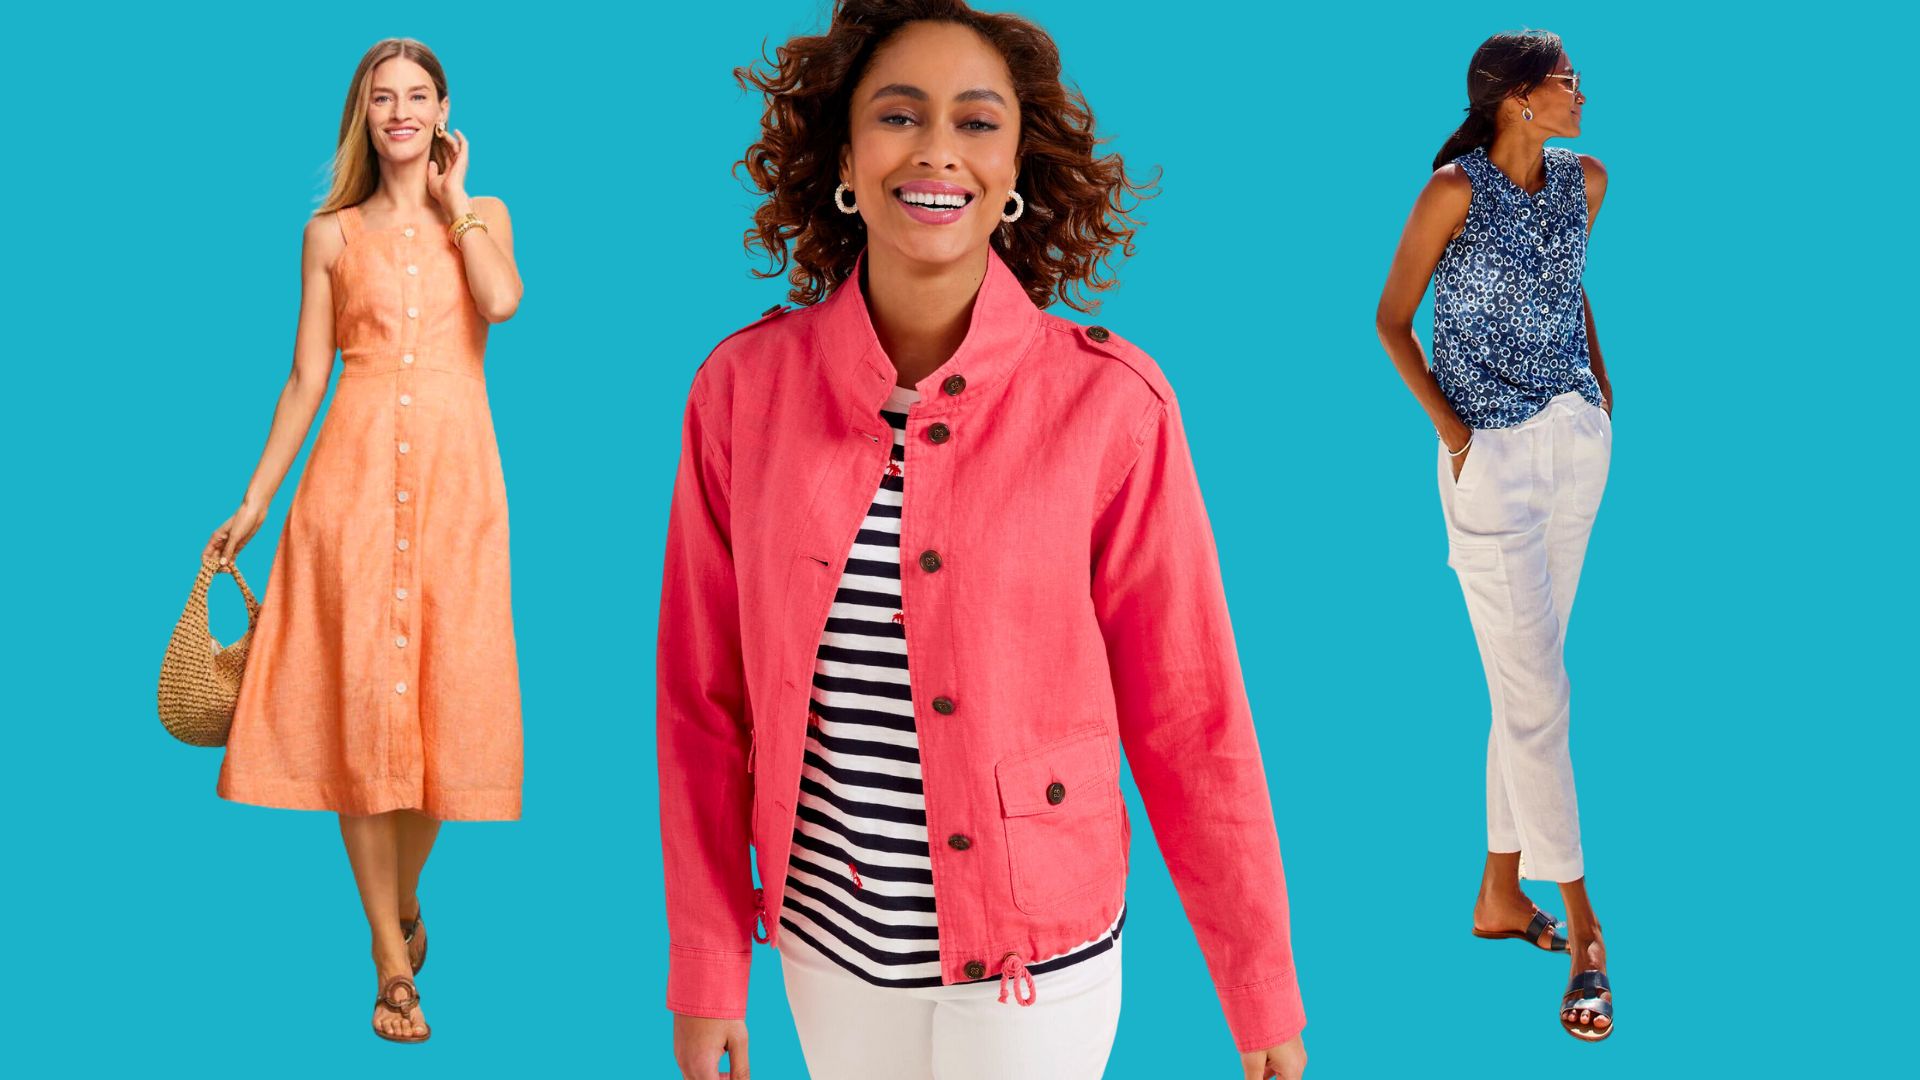 TALBOTS - We're collecting nearly new wear-to-work